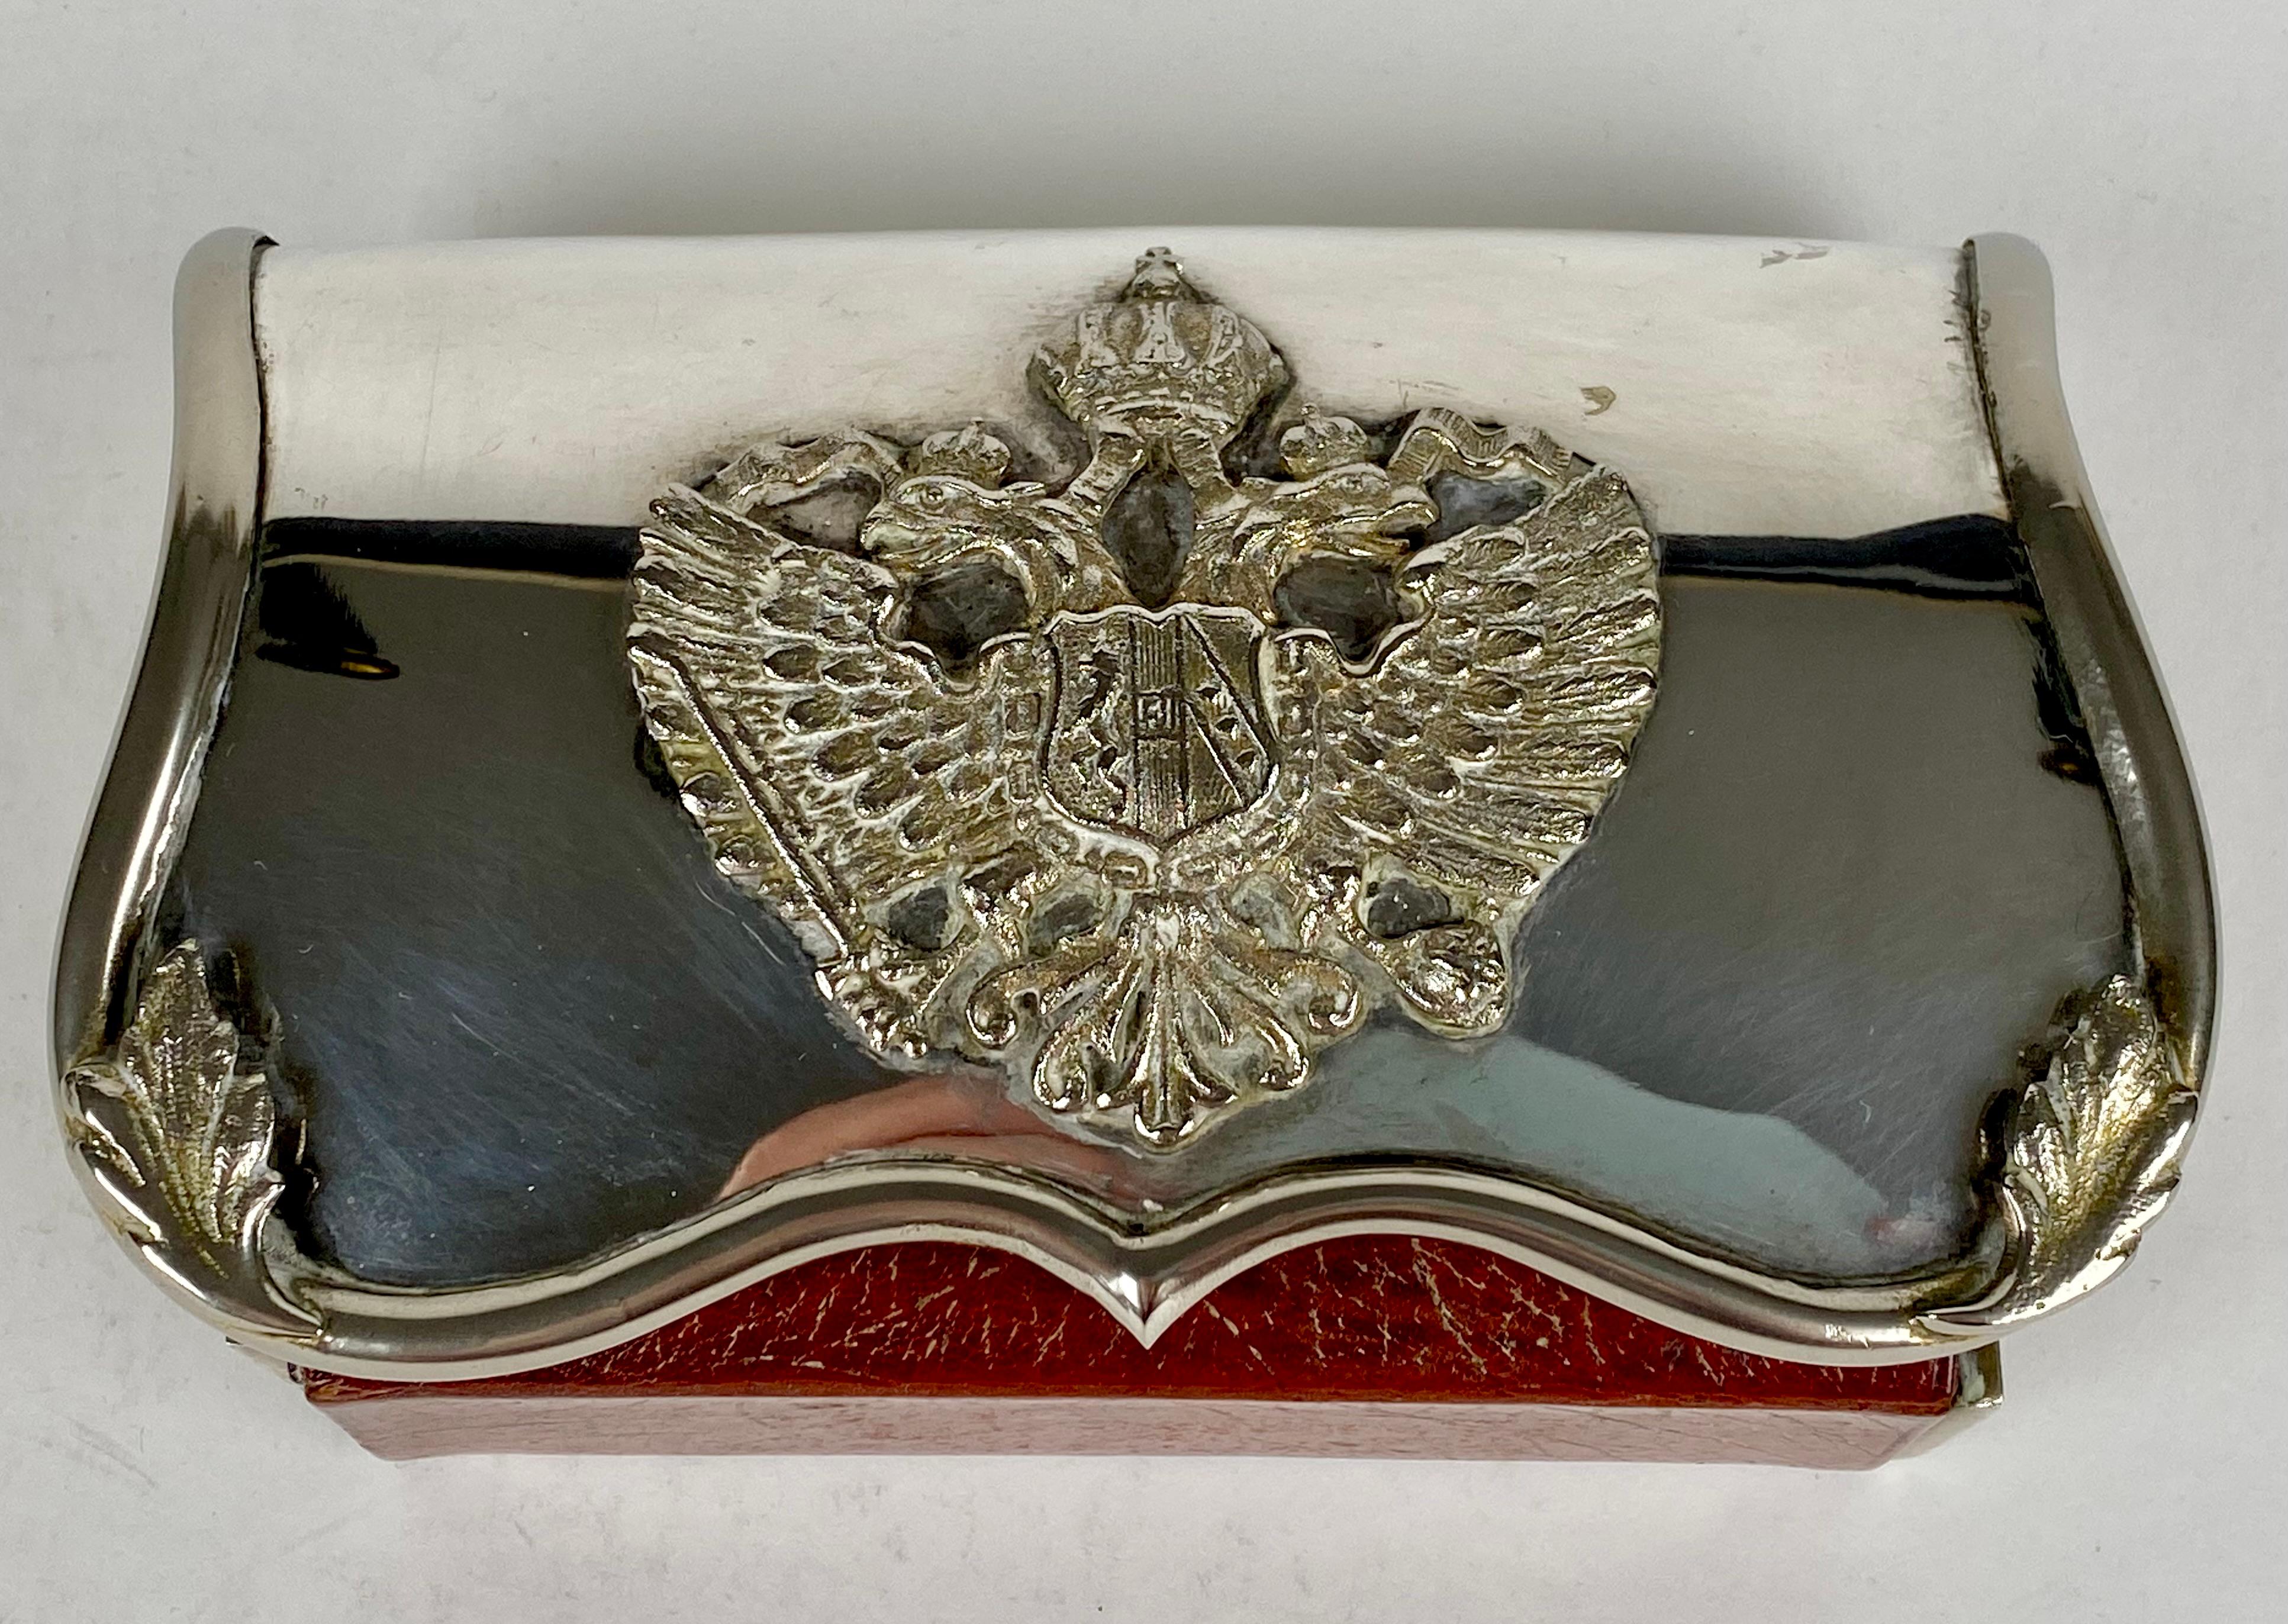 A solid silver cartridge box for a cavalry officer.
Decorated with a double breaded eagle under a regal crown.
Fully hallmarked to the lid circa 1900 
Austo Hungarian Empire 
Length 15 cm 
Width 10cm 